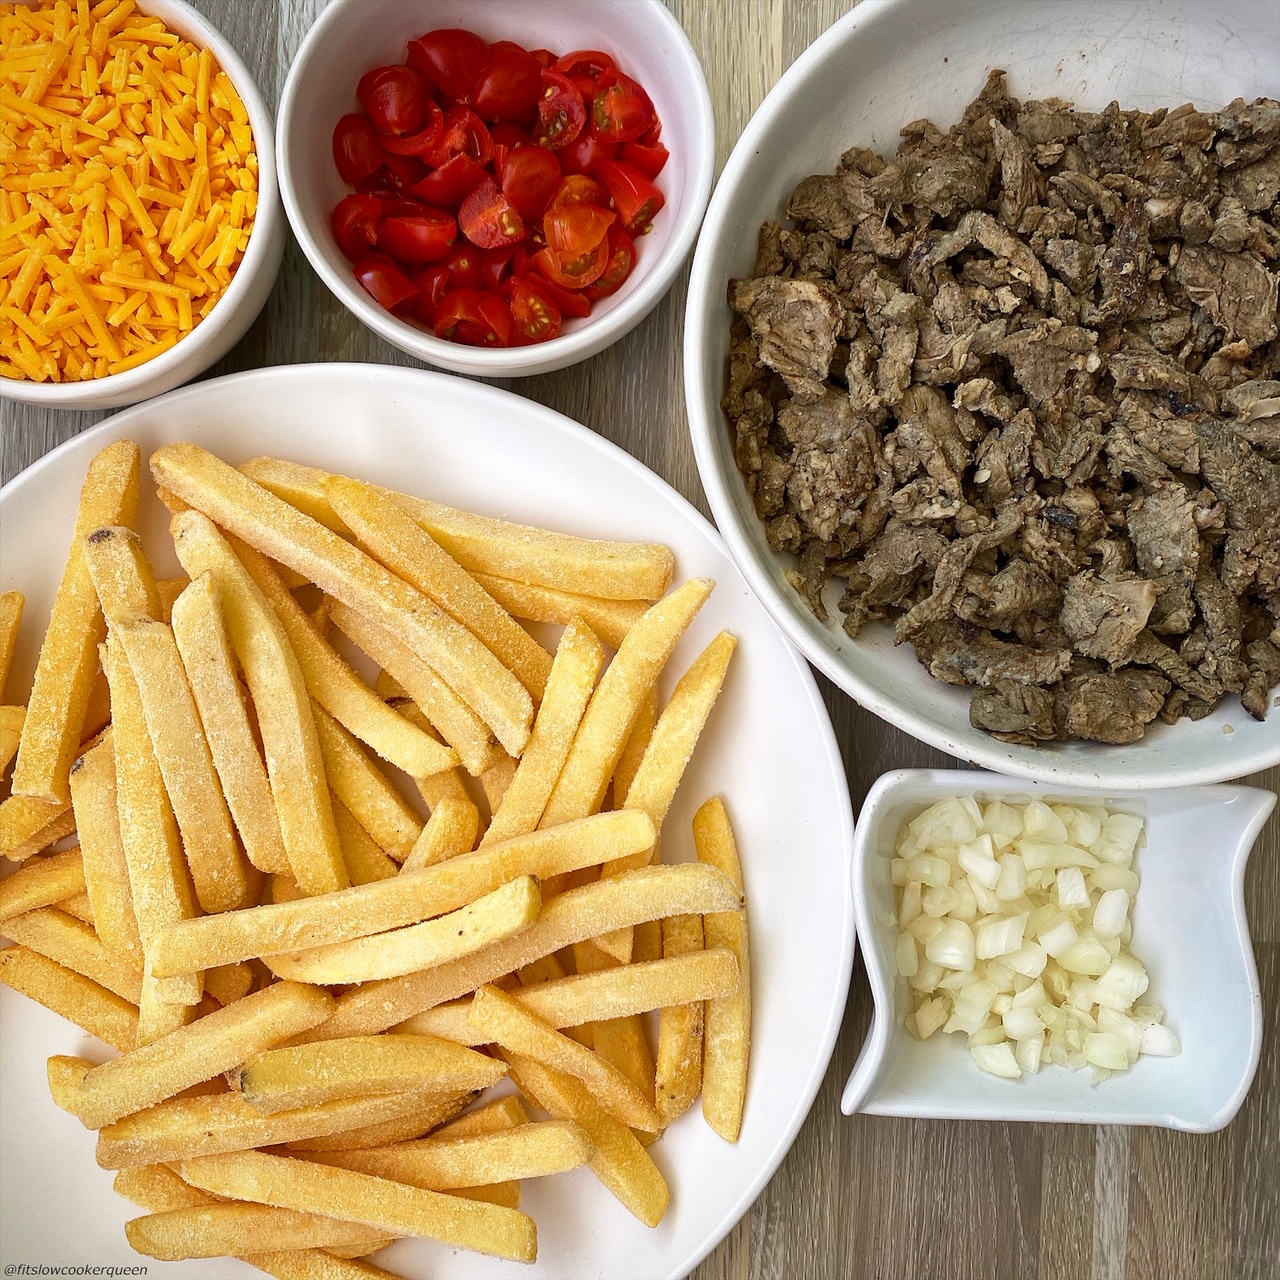 frozen french fries, cooked carne asada, shredded cheddar cheese, tomatoes, and onions in bowl